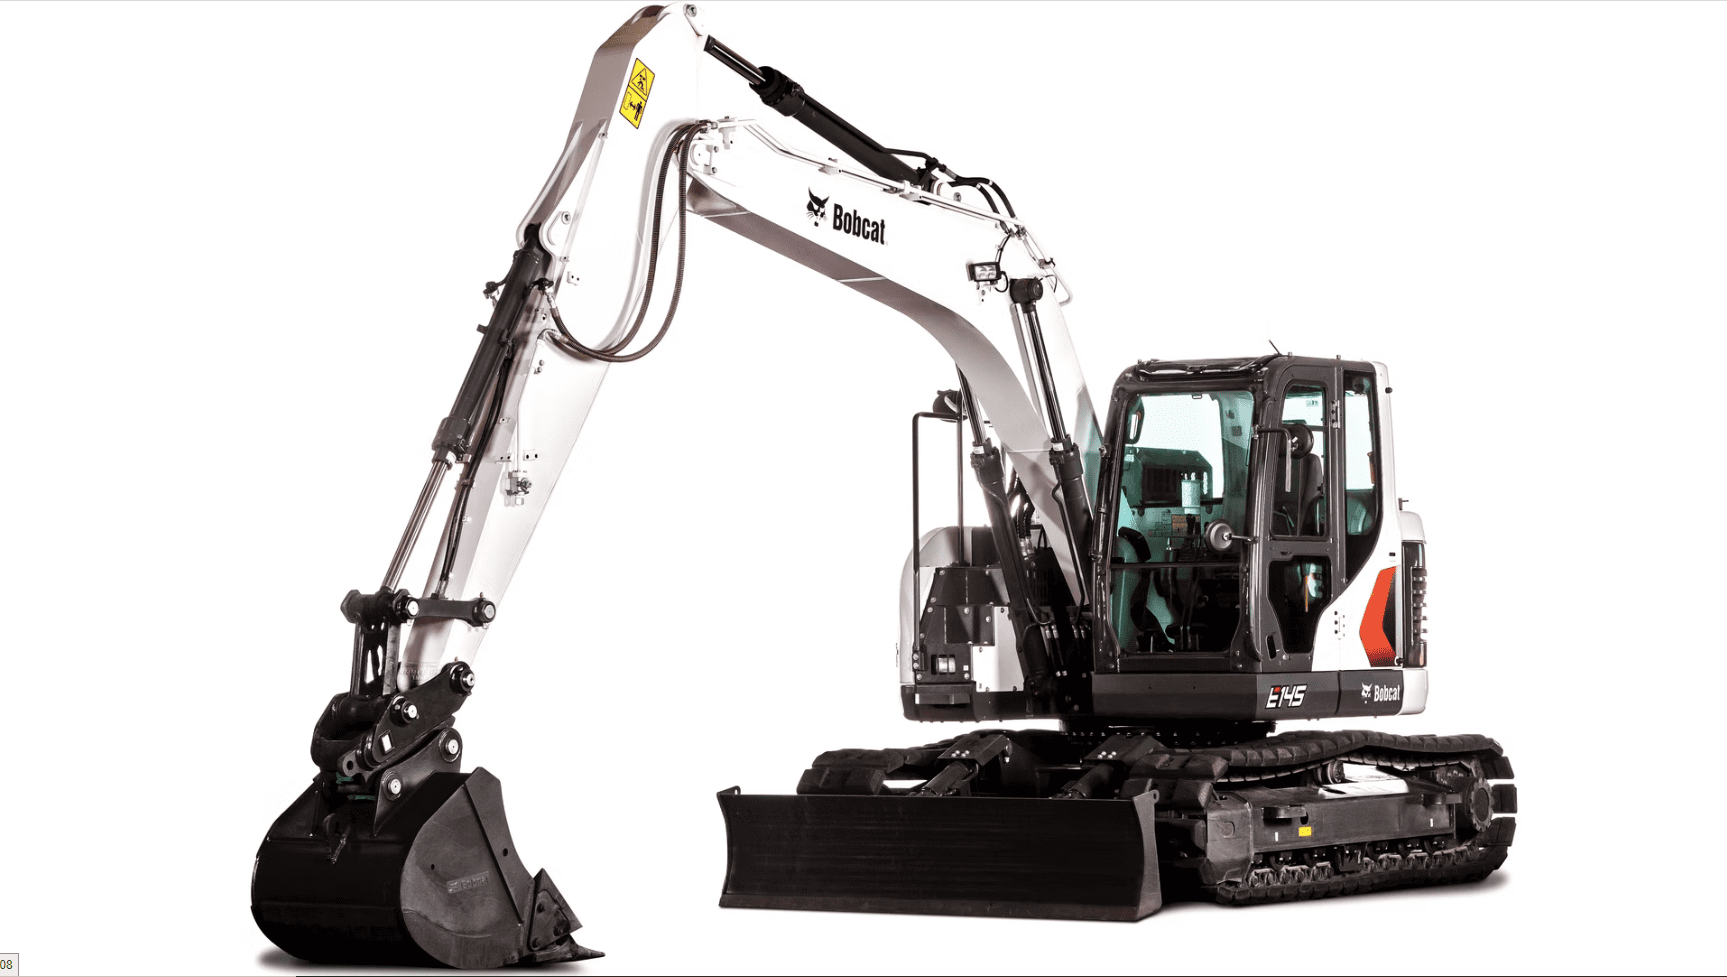 Browse Specs and more for the E145 Large Excavator - Bobcat of the Rockies